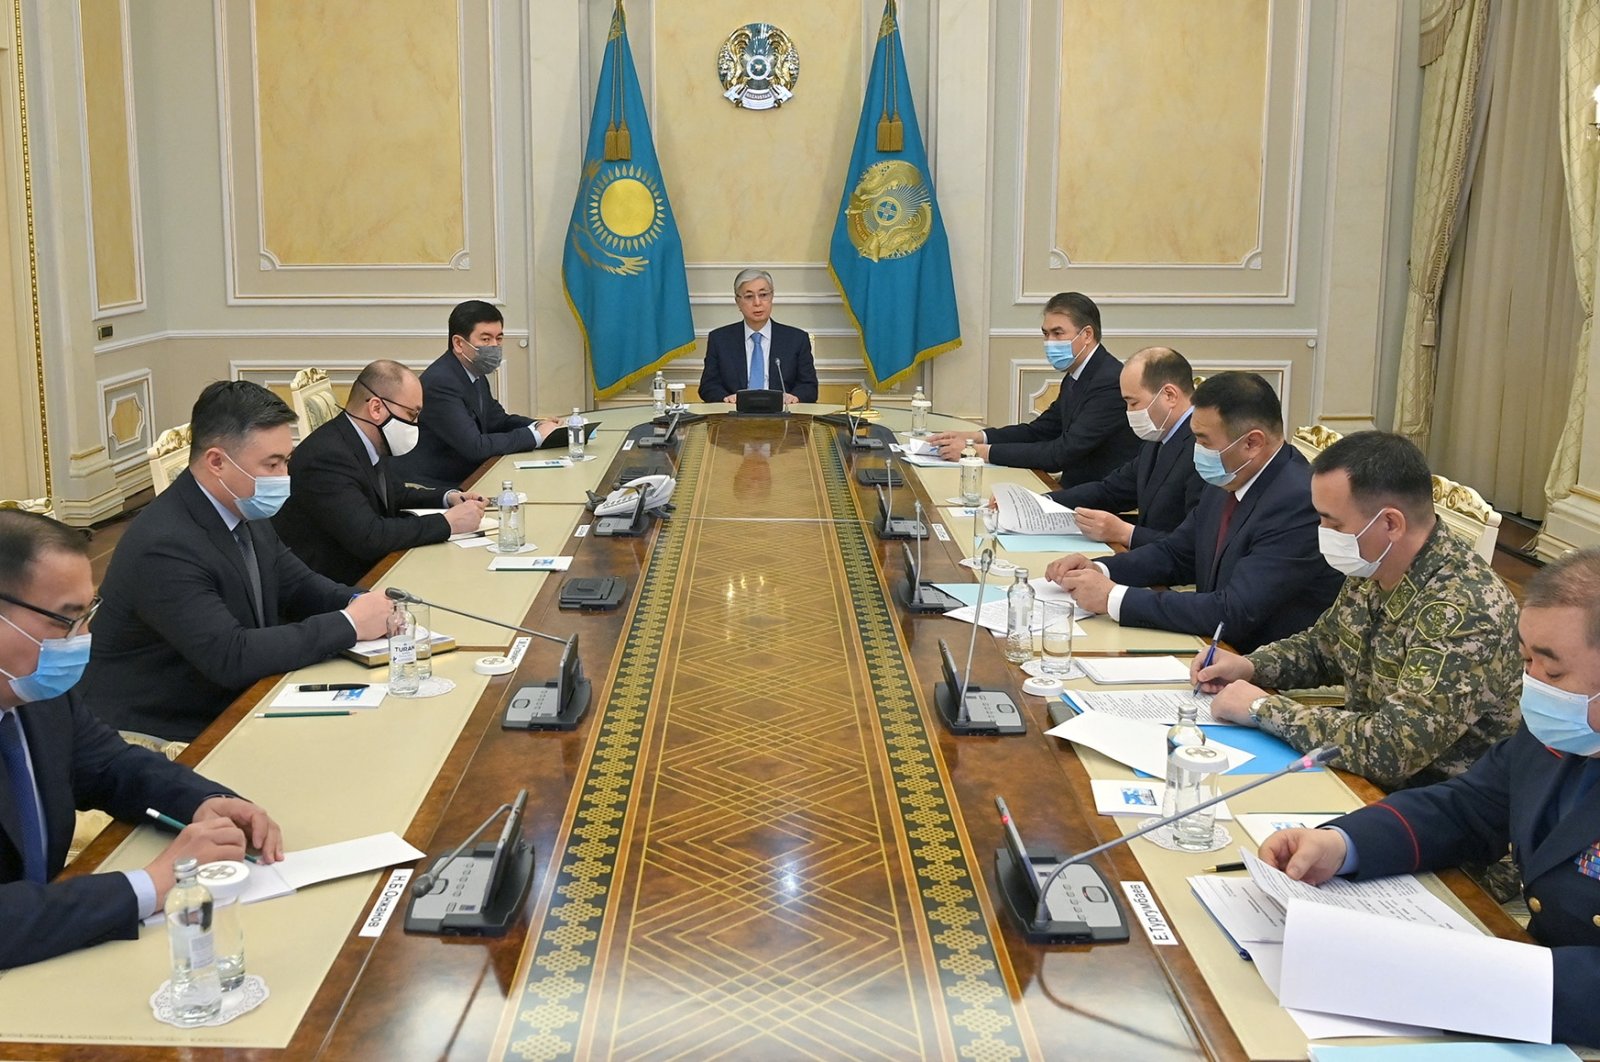 Kazakh President Kassym-Jomart Tokayev chairs a meeting of the emergency operations center following mass protests triggered by fuel price increase in Nur-Sultan, Kazakhstan Jan. 8, 2022. (Presidency of Kazakhstan via Reuters)